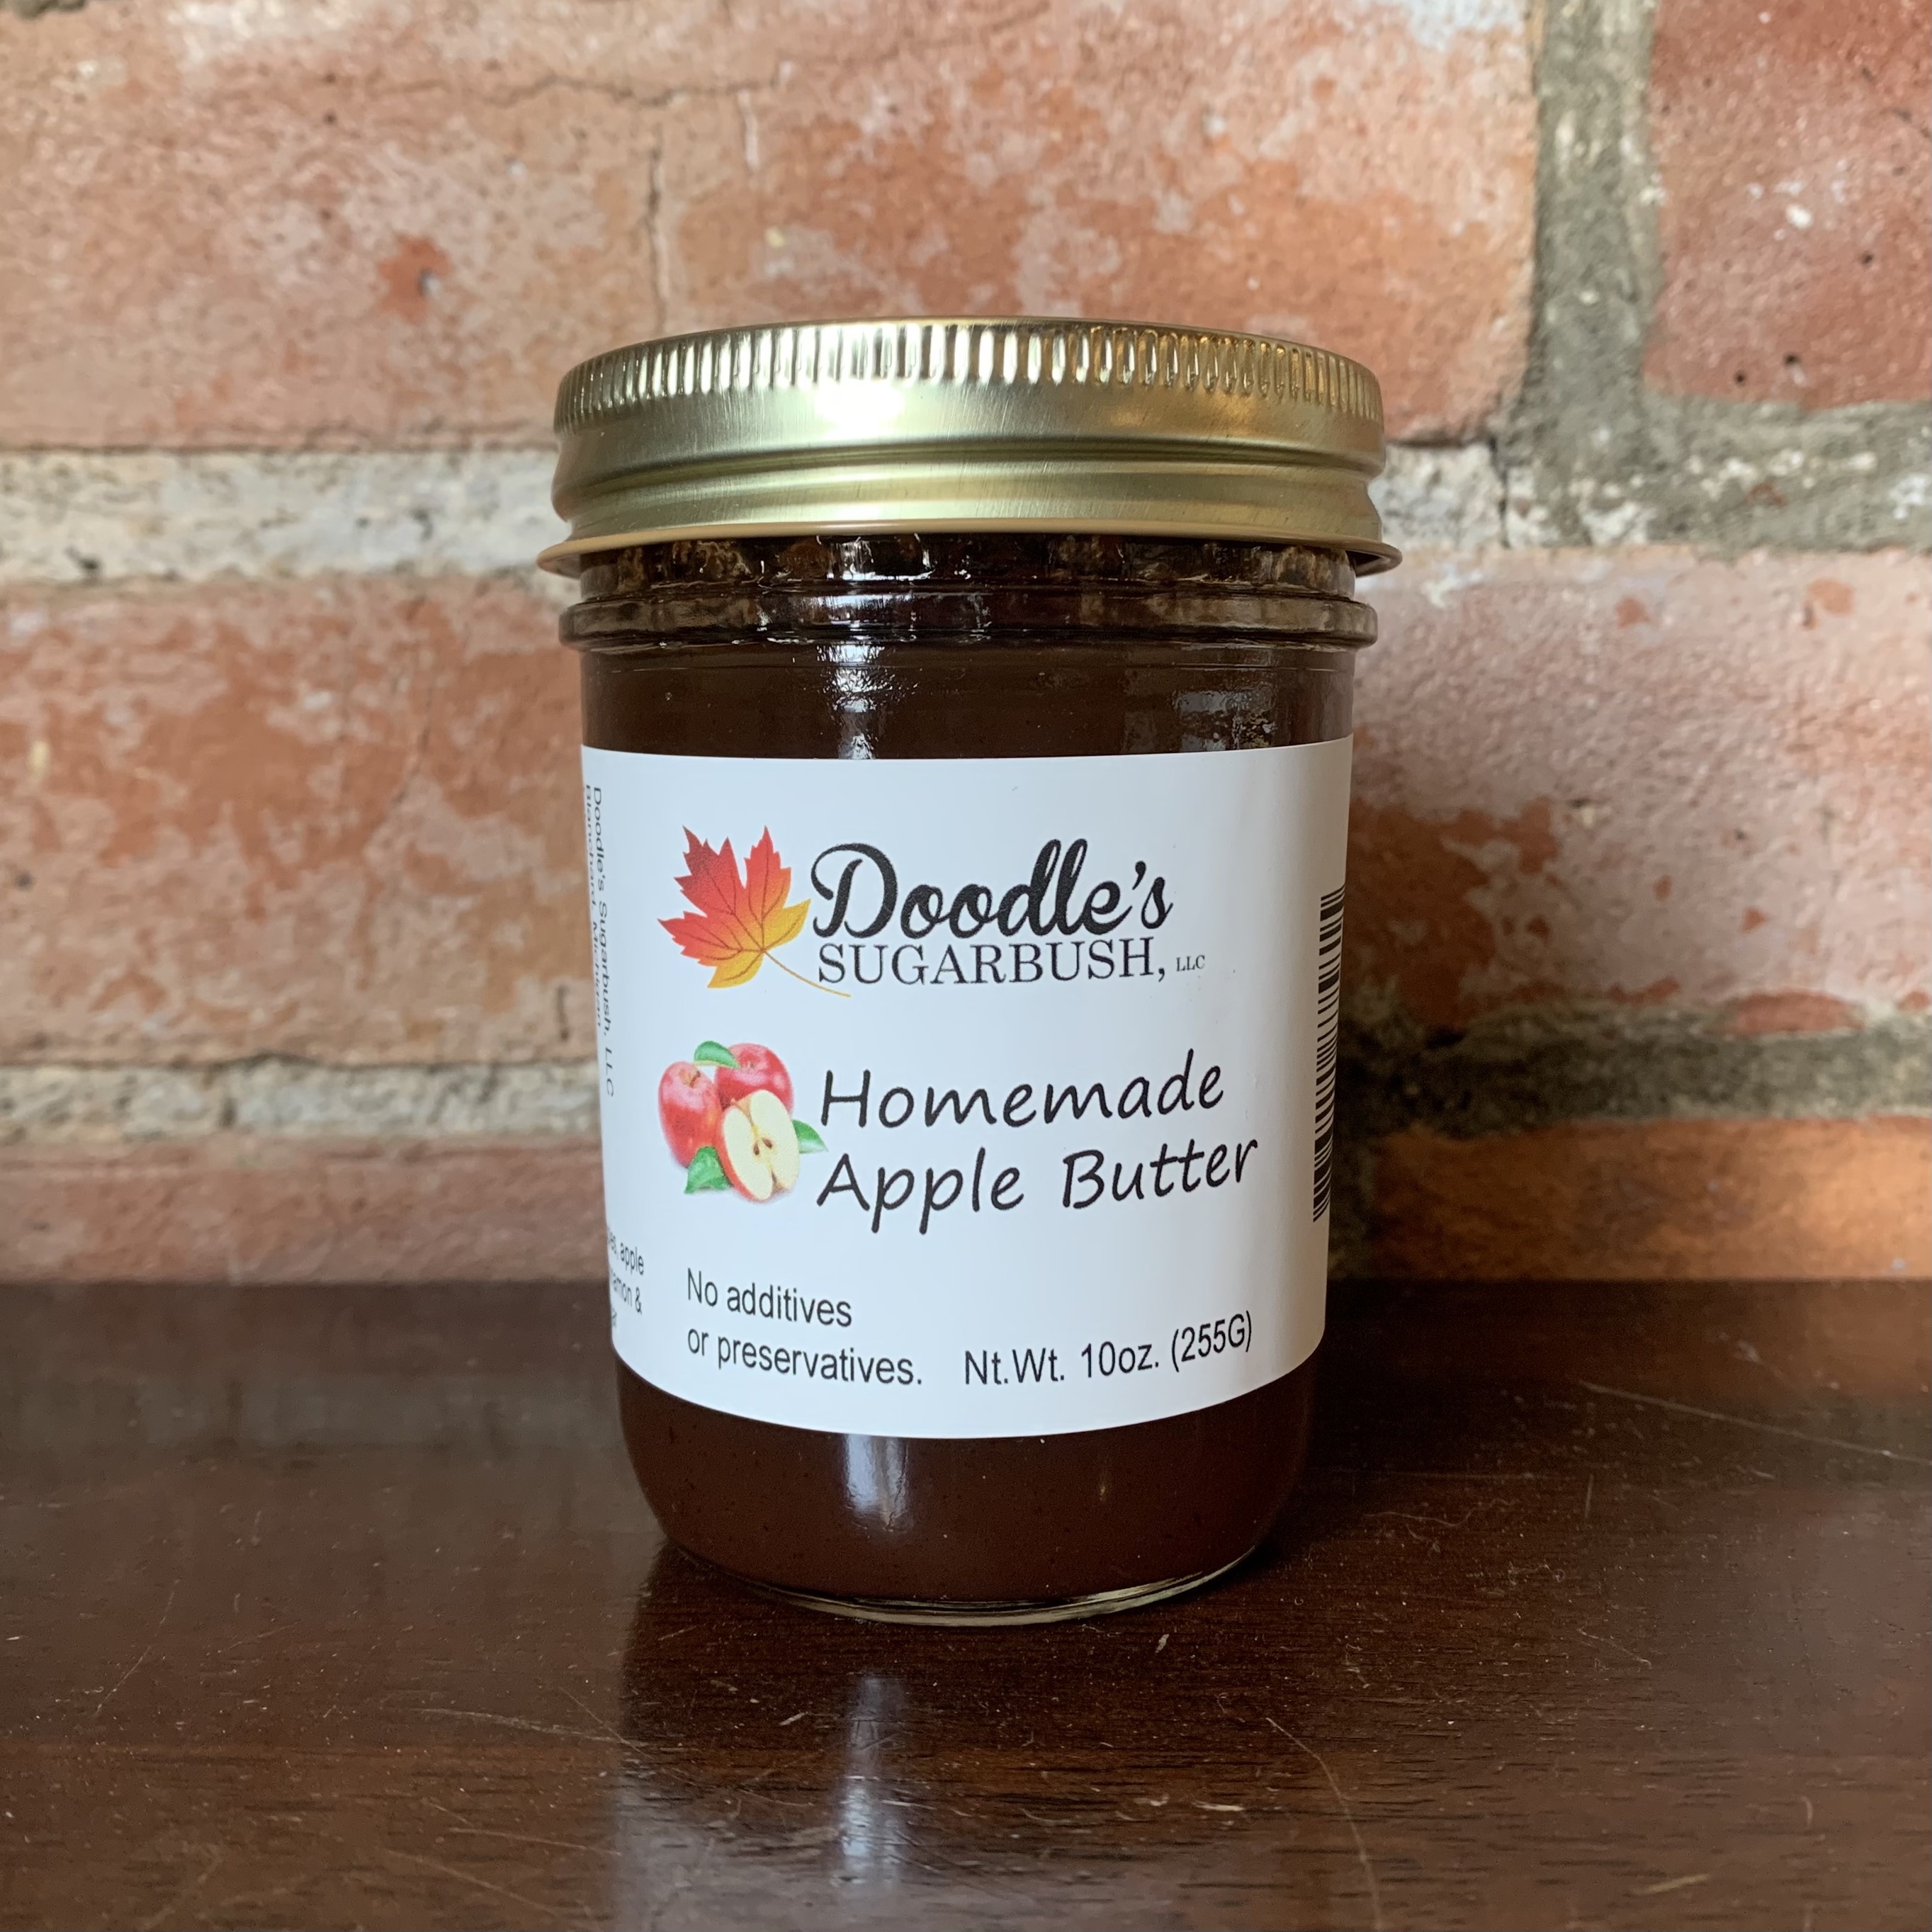 Picture Doodle's Sugarbush Homemade Apple Butter